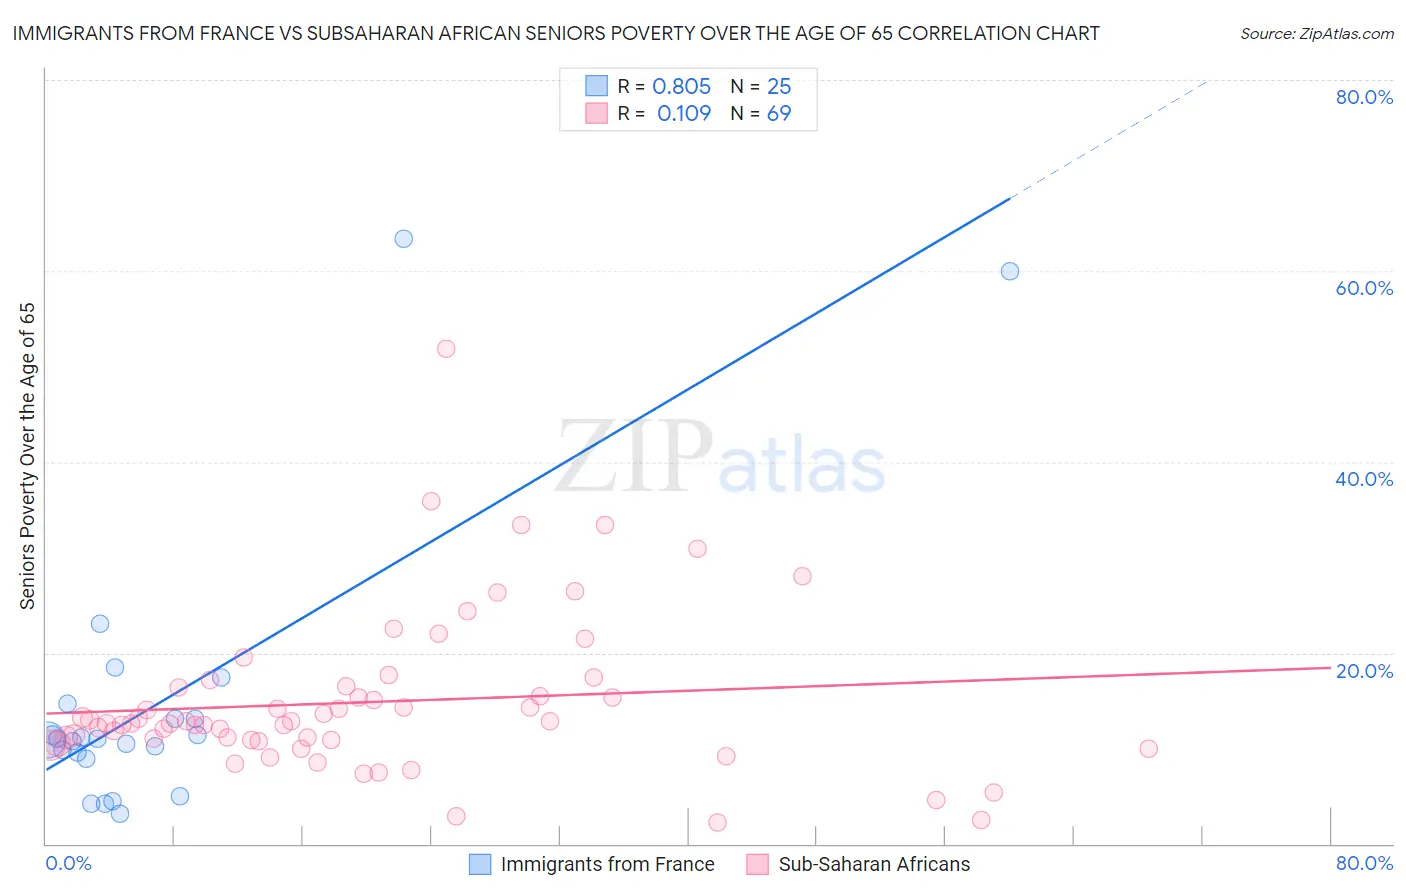 Immigrants from France vs Subsaharan African Seniors Poverty Over the Age of 65